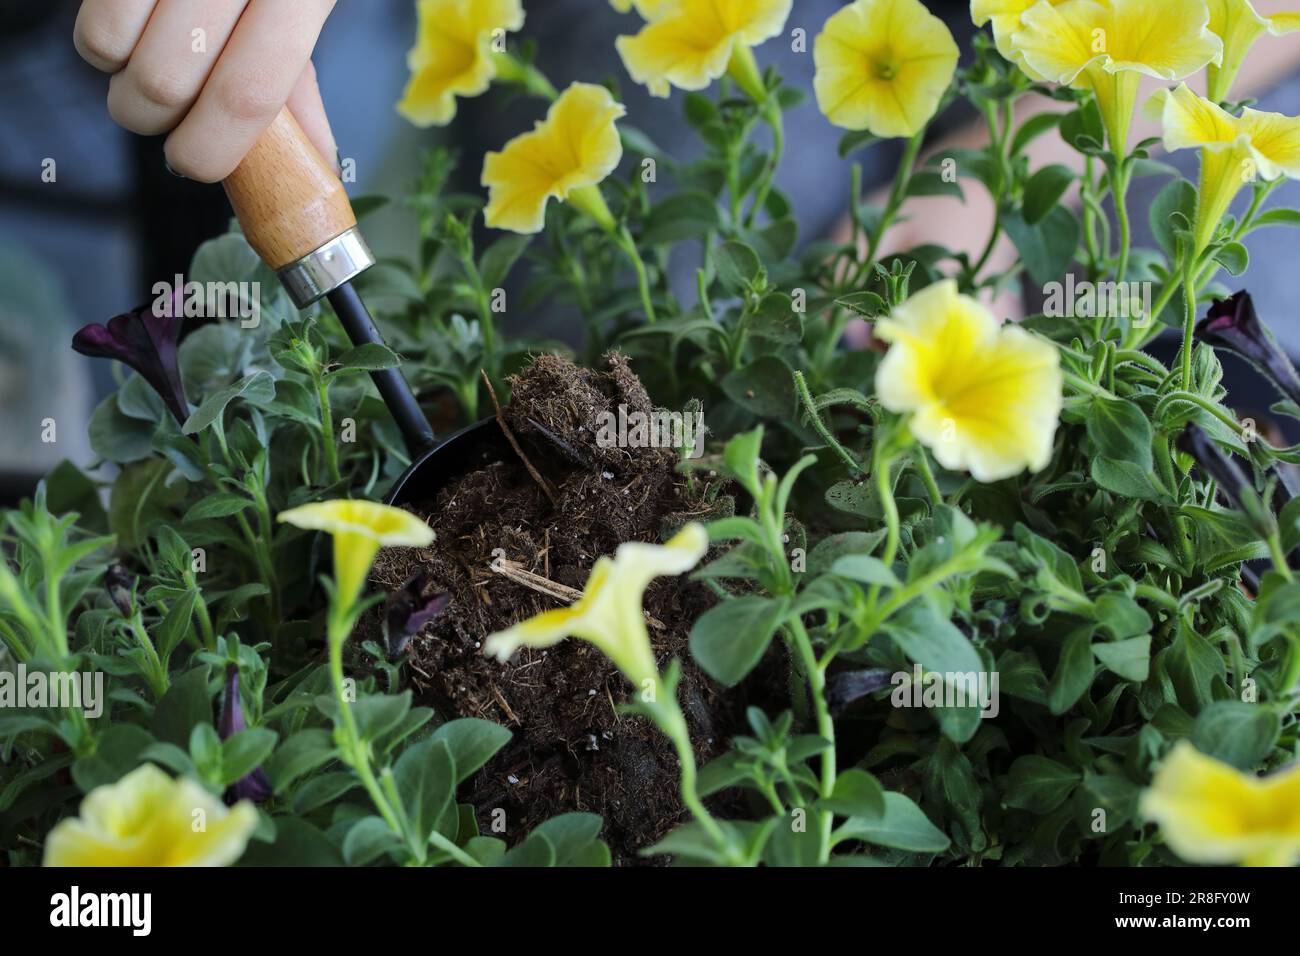 Hand of young woman using trowel to plant a hanging basket or pot of flowers. Flowers include yellow and black petunias with dichondra. Stock Photo